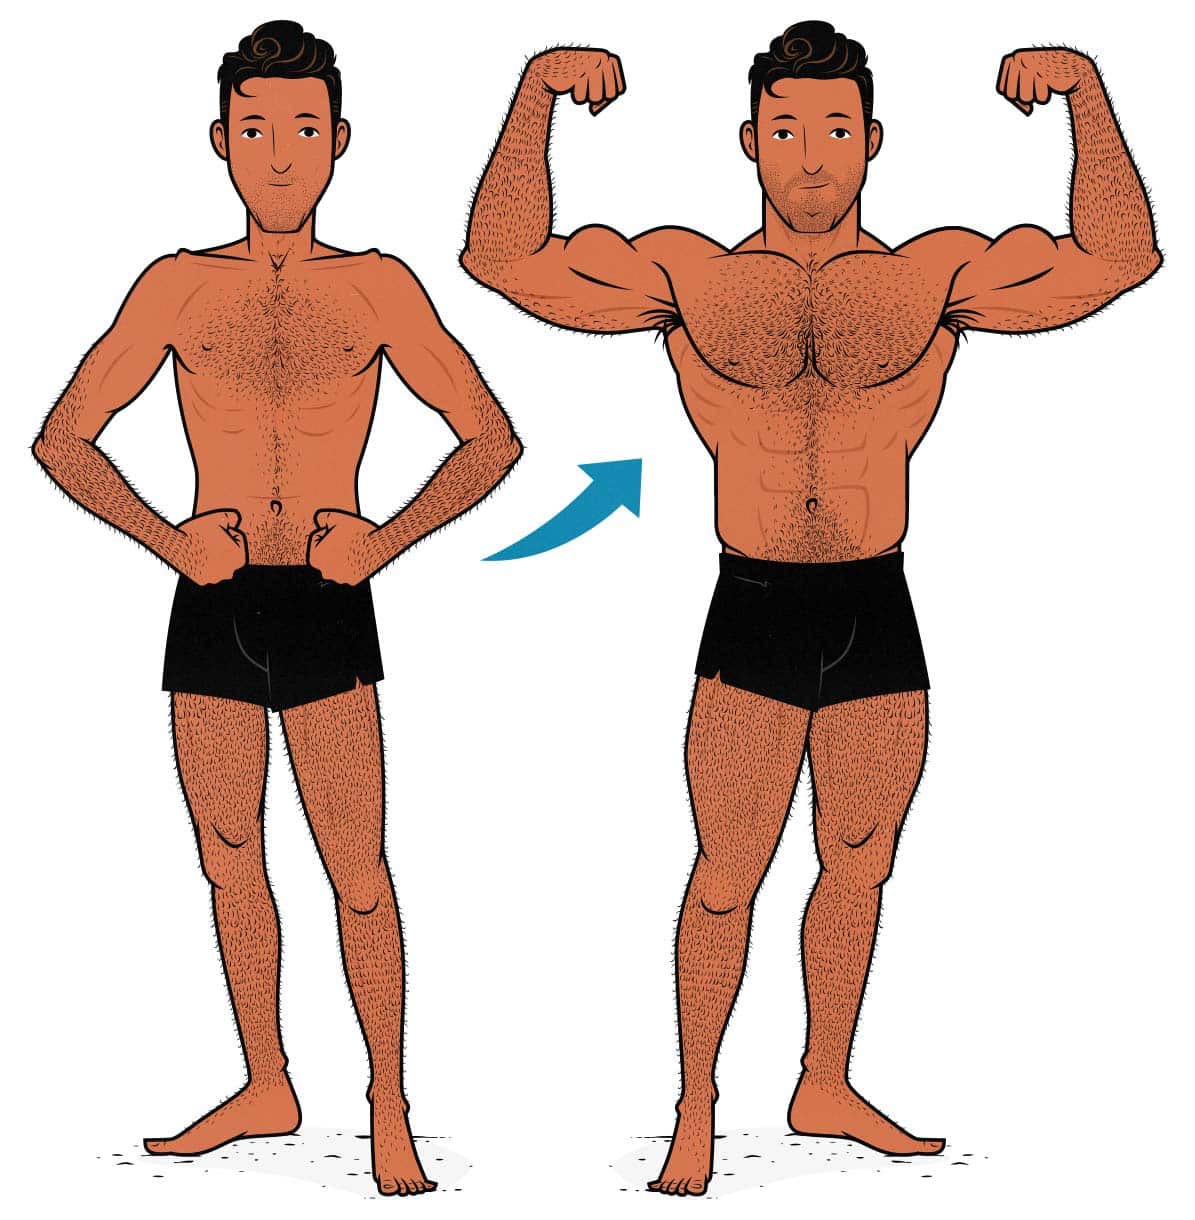 Cartoon illustration showing a skinny beginner bulking up and leanly building muscle.